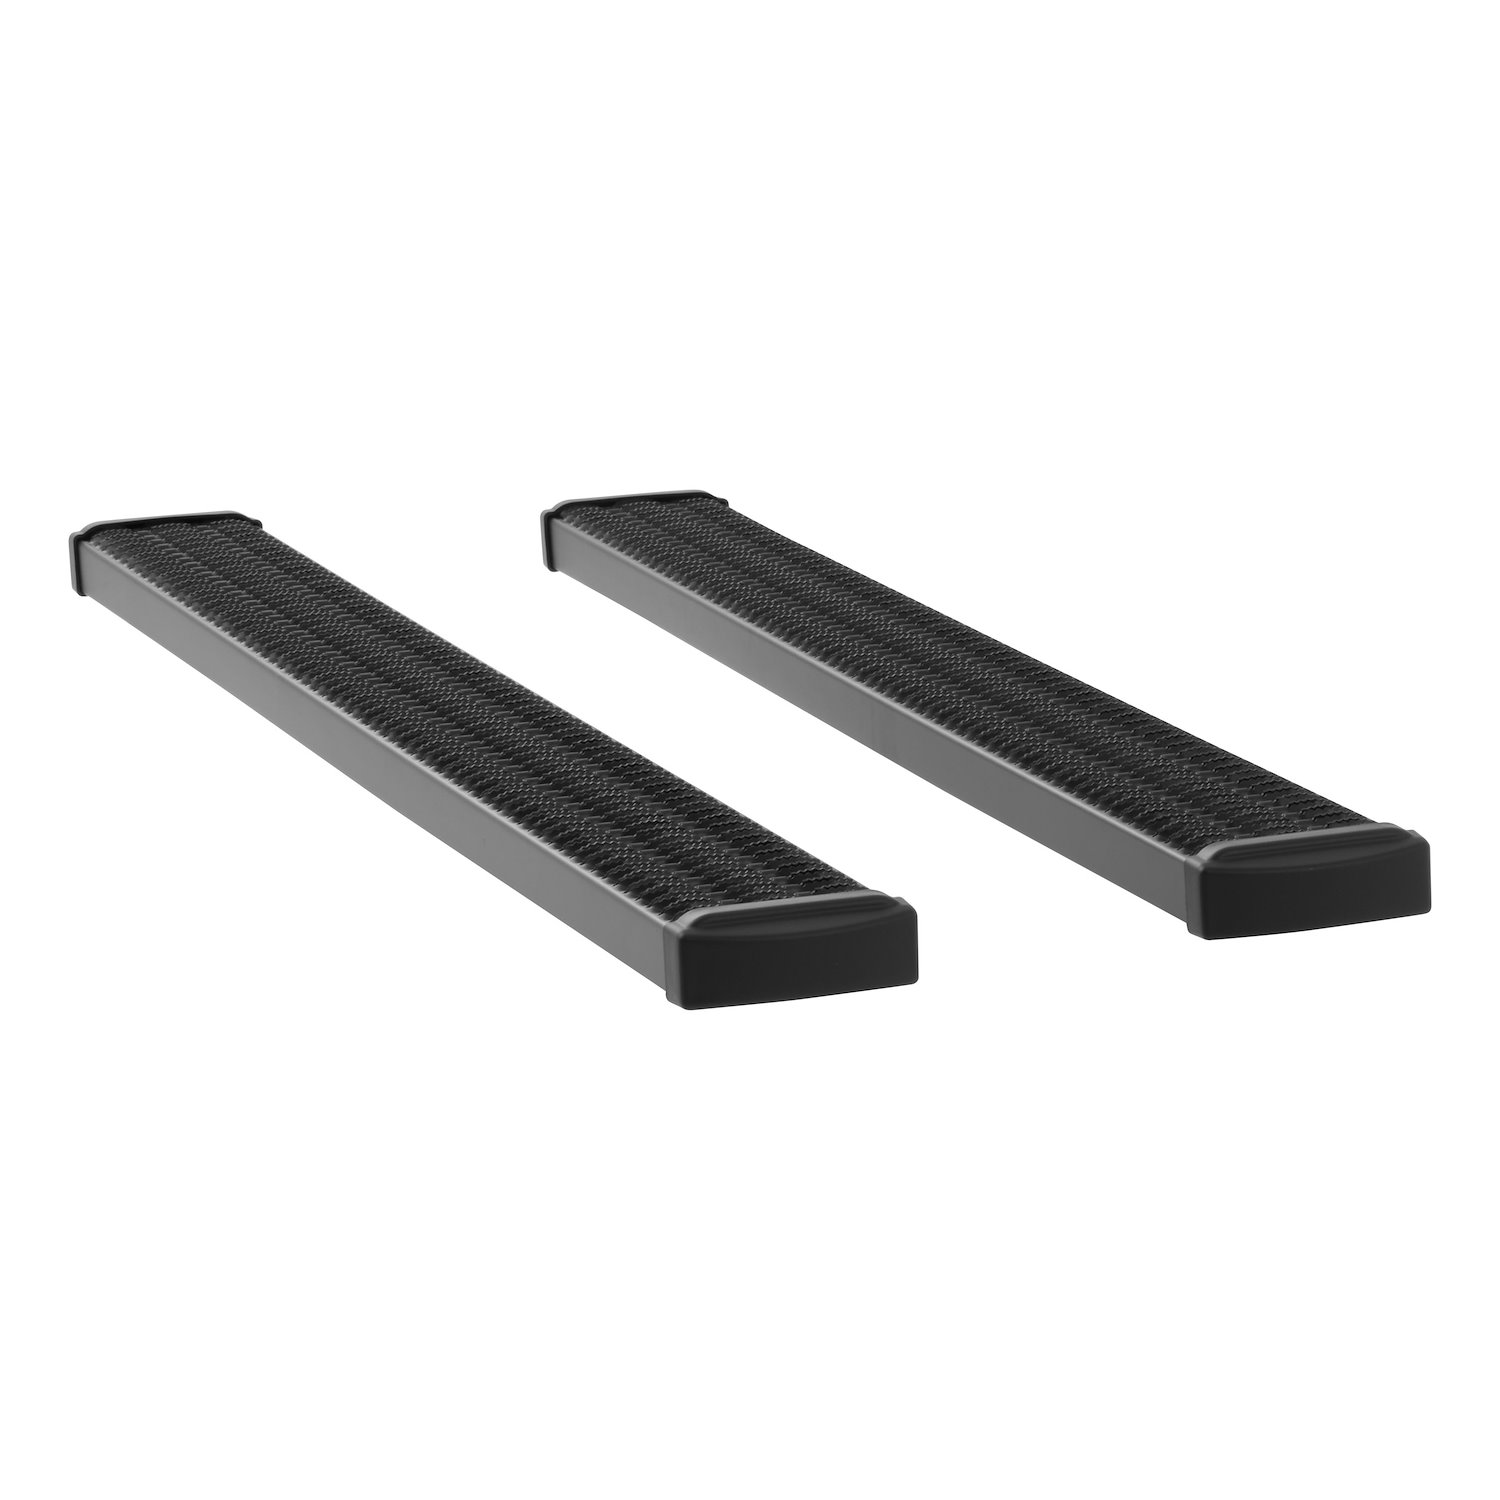 415078-400938 Grip Step 7 in. x 78 in. Aluminum W2W Running Boards Fits Select Dodge, Ram 1500